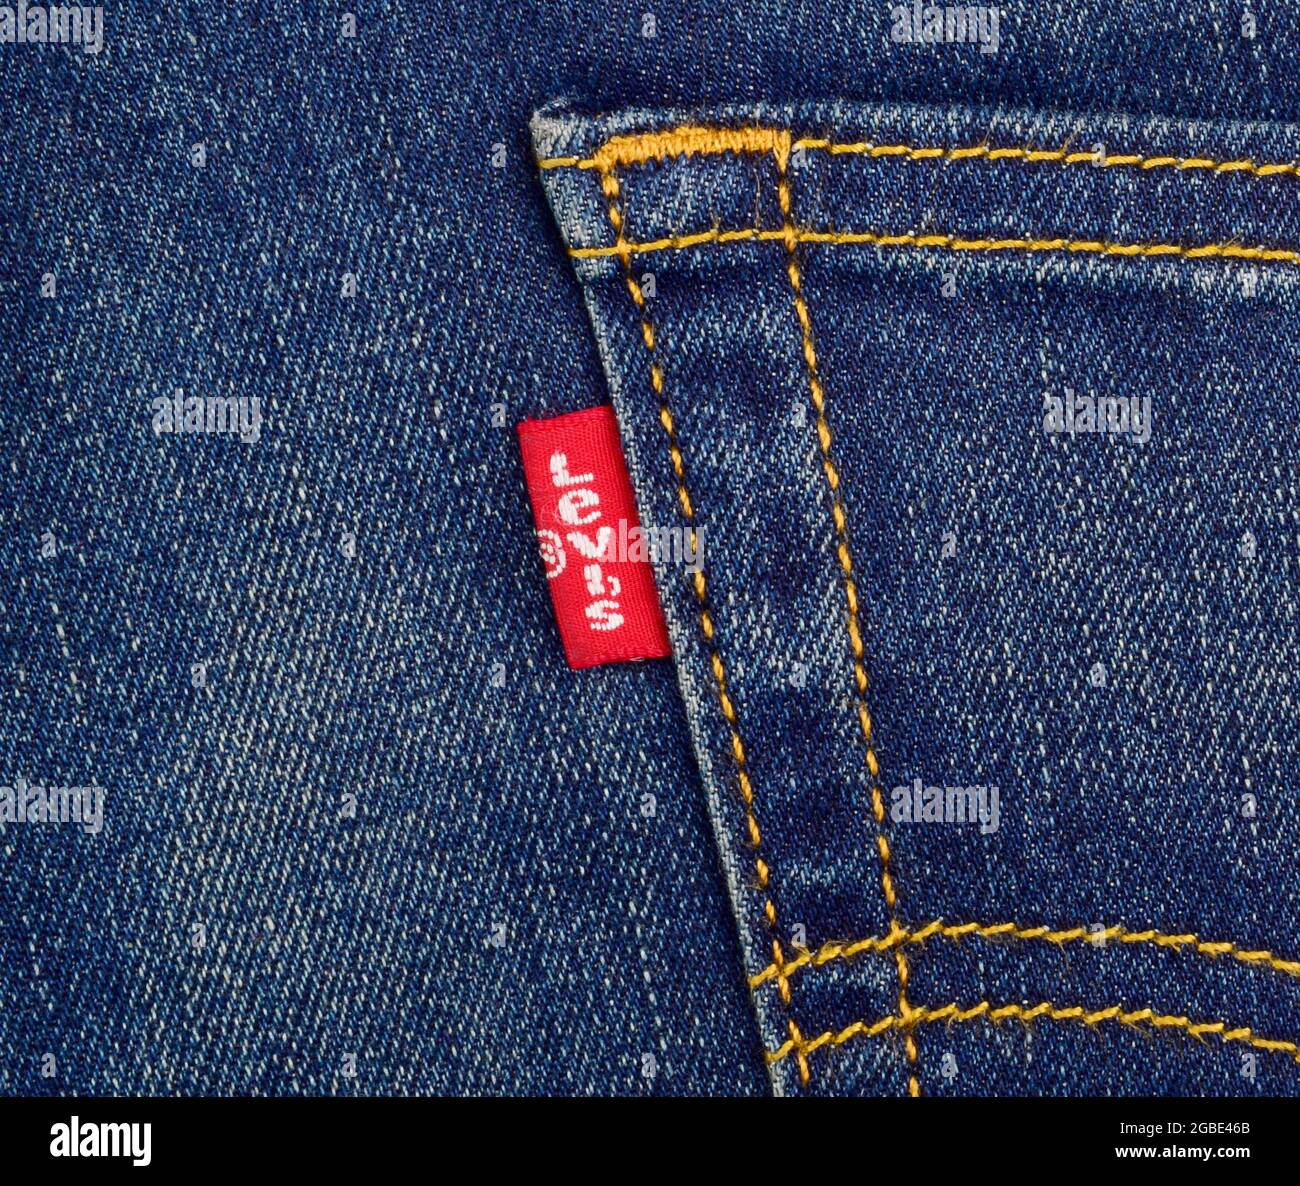 India, New Delhi, 15 Oct 2018: Close up of the LEVI'S red label on the back pocket of denim jeans. Stock Photo